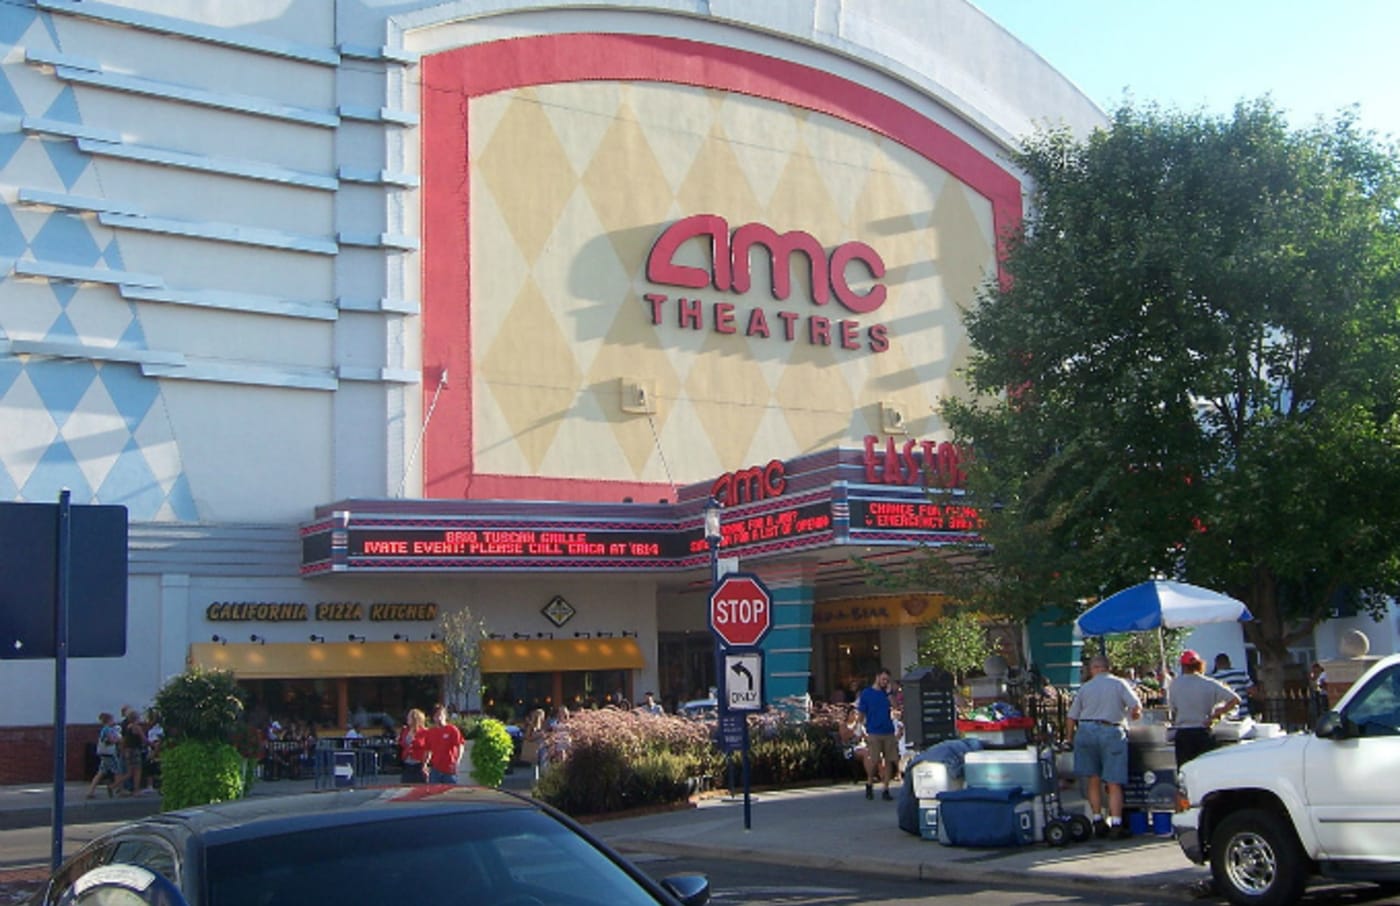 clearview amc movies